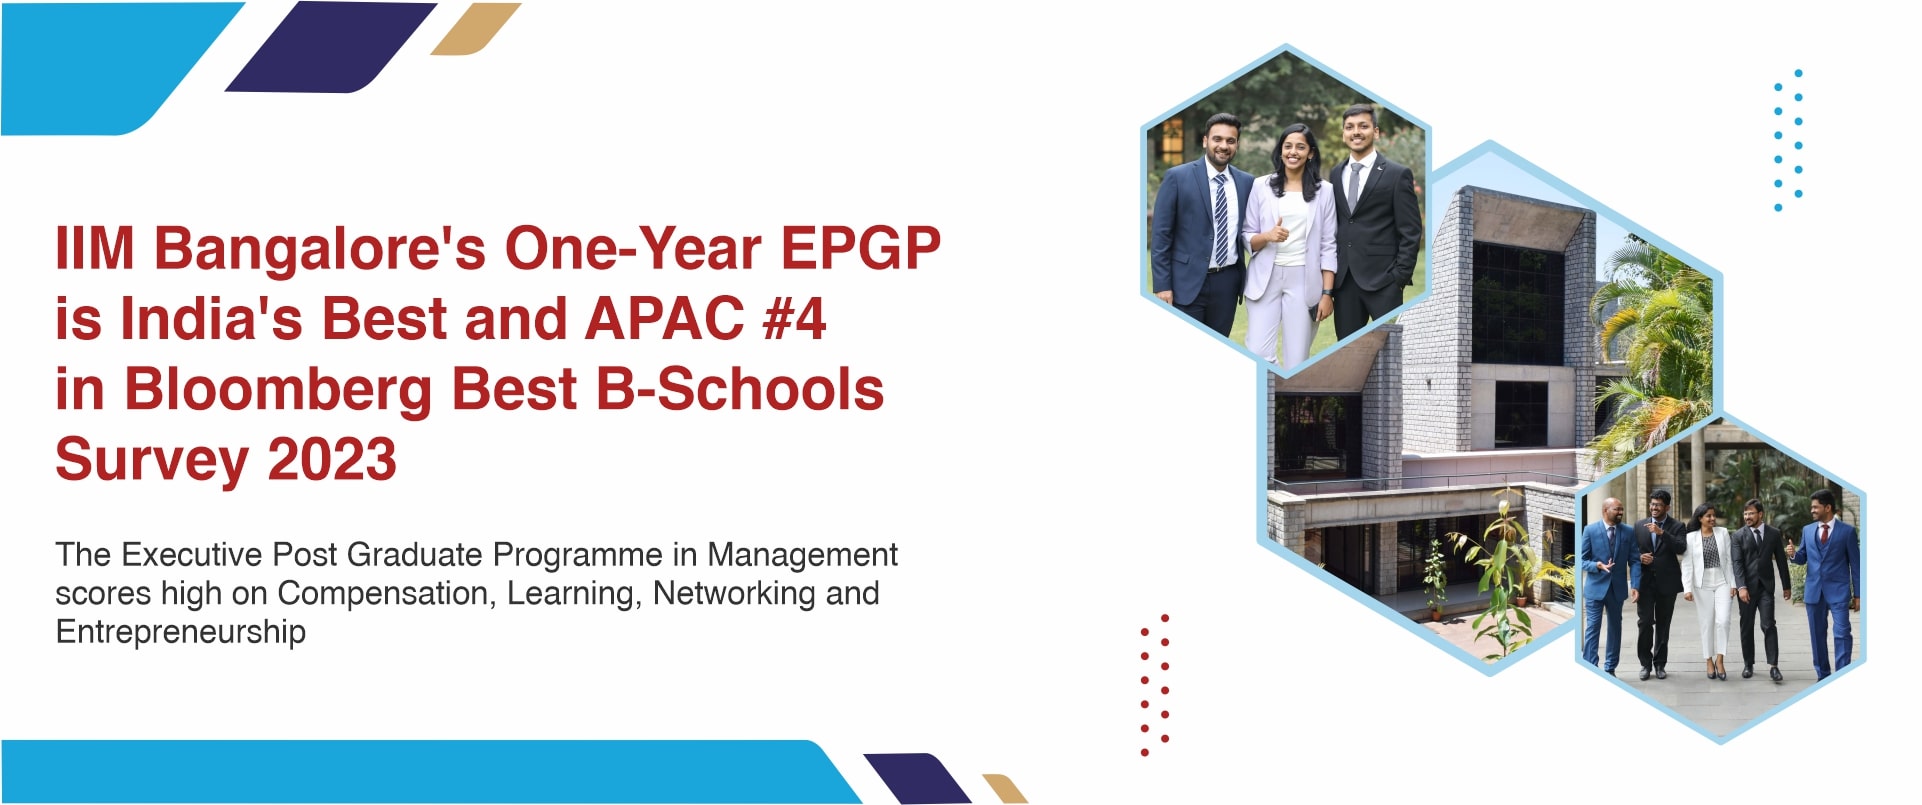 EPGP is India’s Best and APAC #4 in Bloomberg Best B-Schools Survey 2023